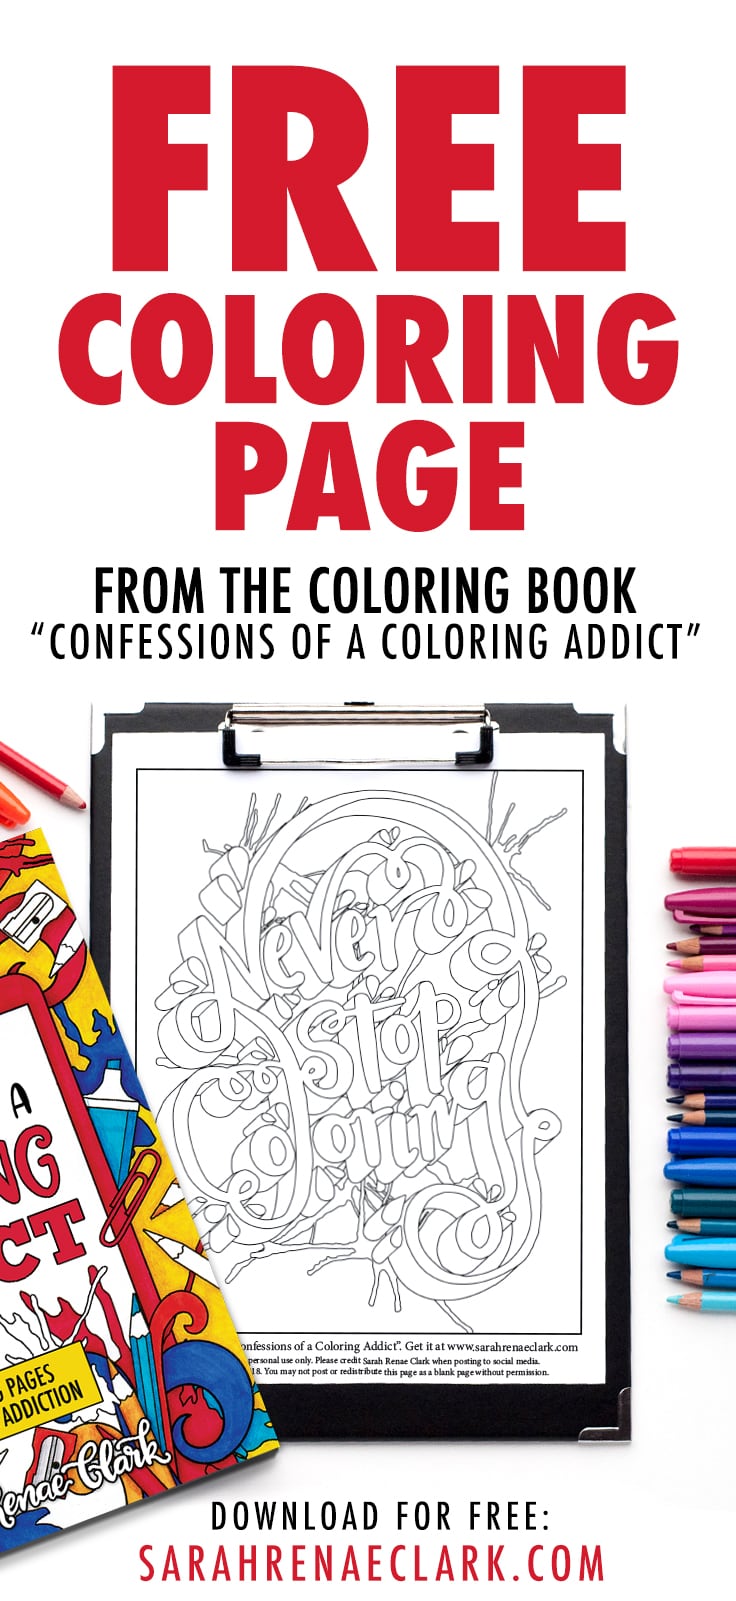 Free coloring page "Never Stop Coloring"